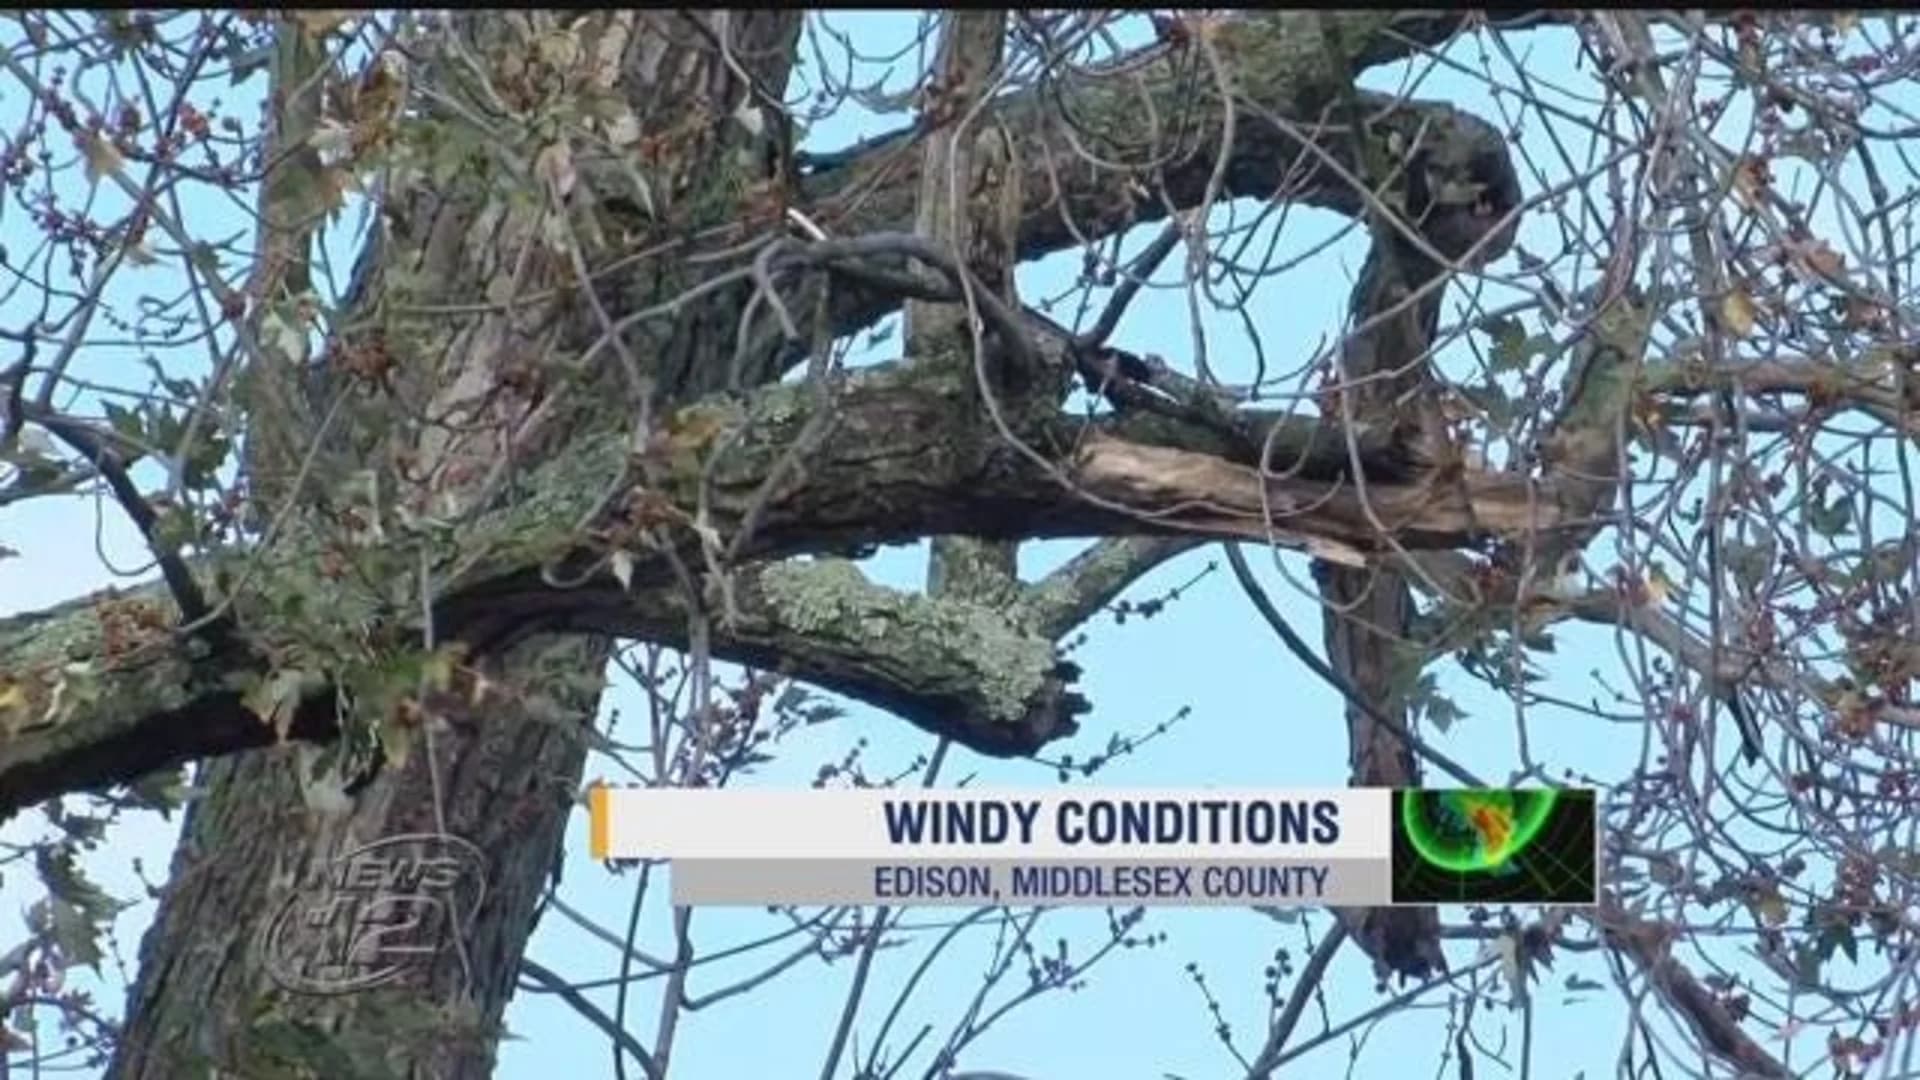 Gusts blamed for downed trees, power outages